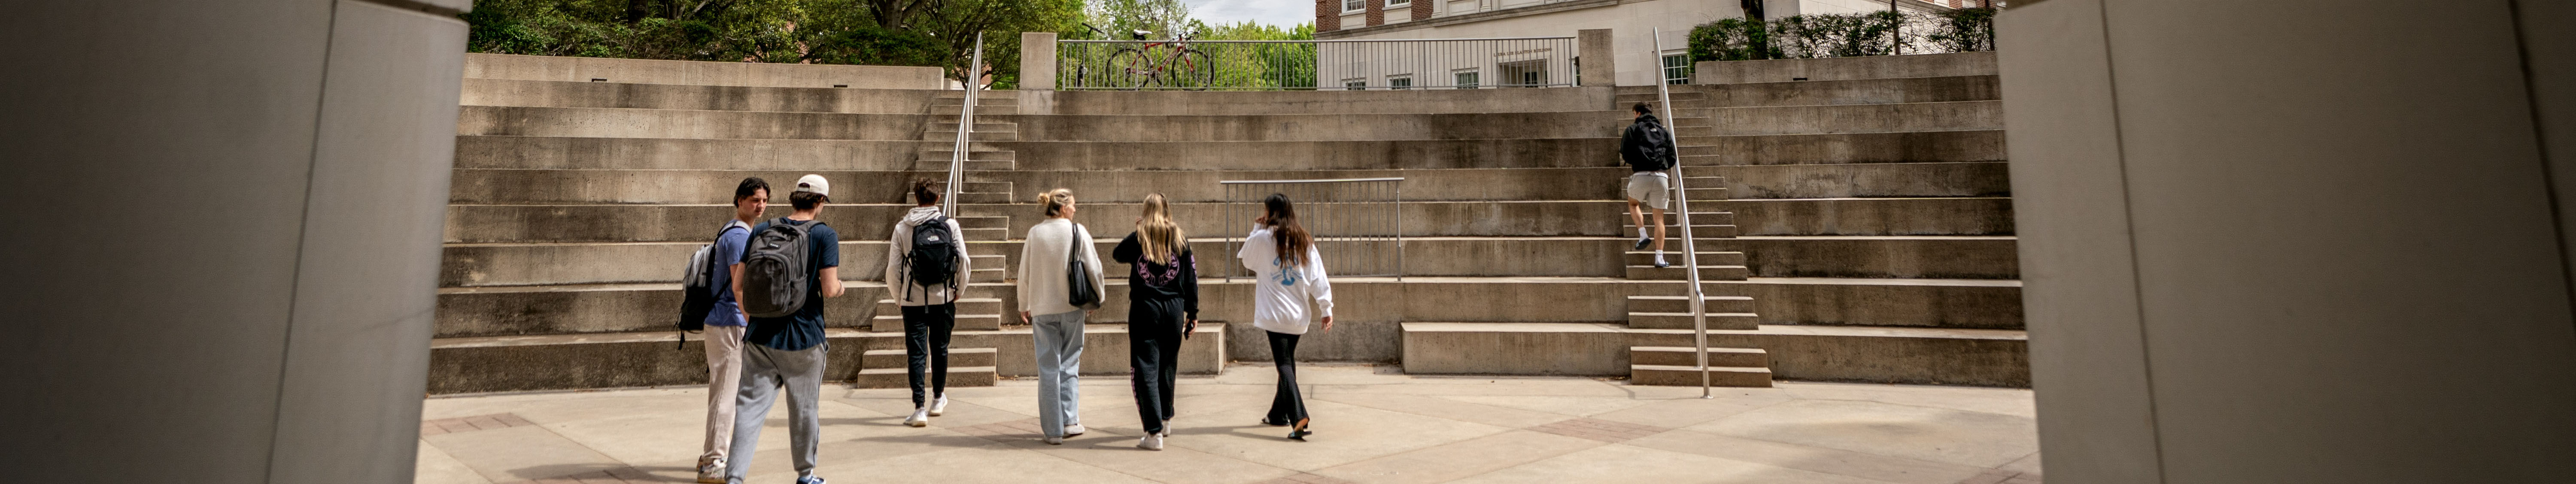 students walking up stairs in a group